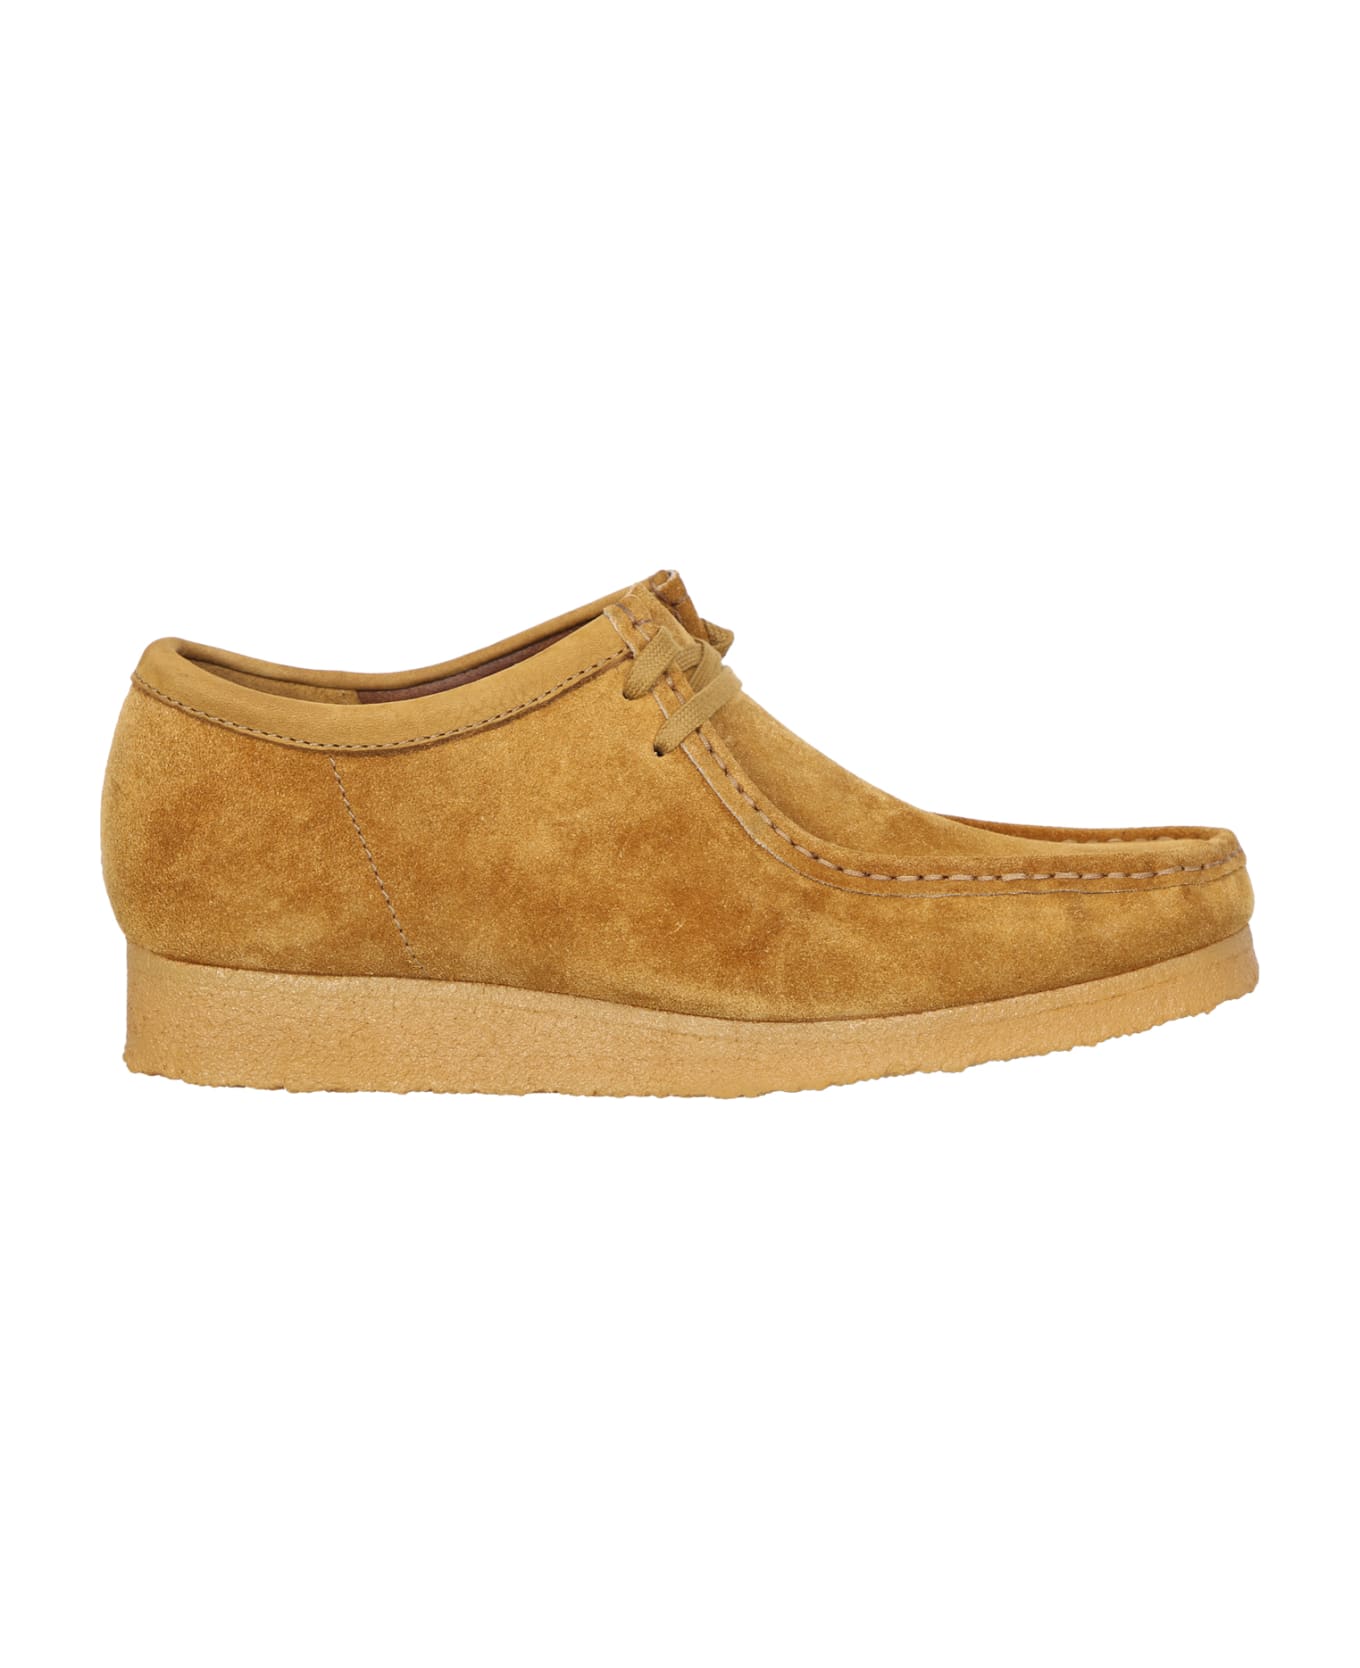 Clarks Wallabee Light Brown Ankle Boots - Brown